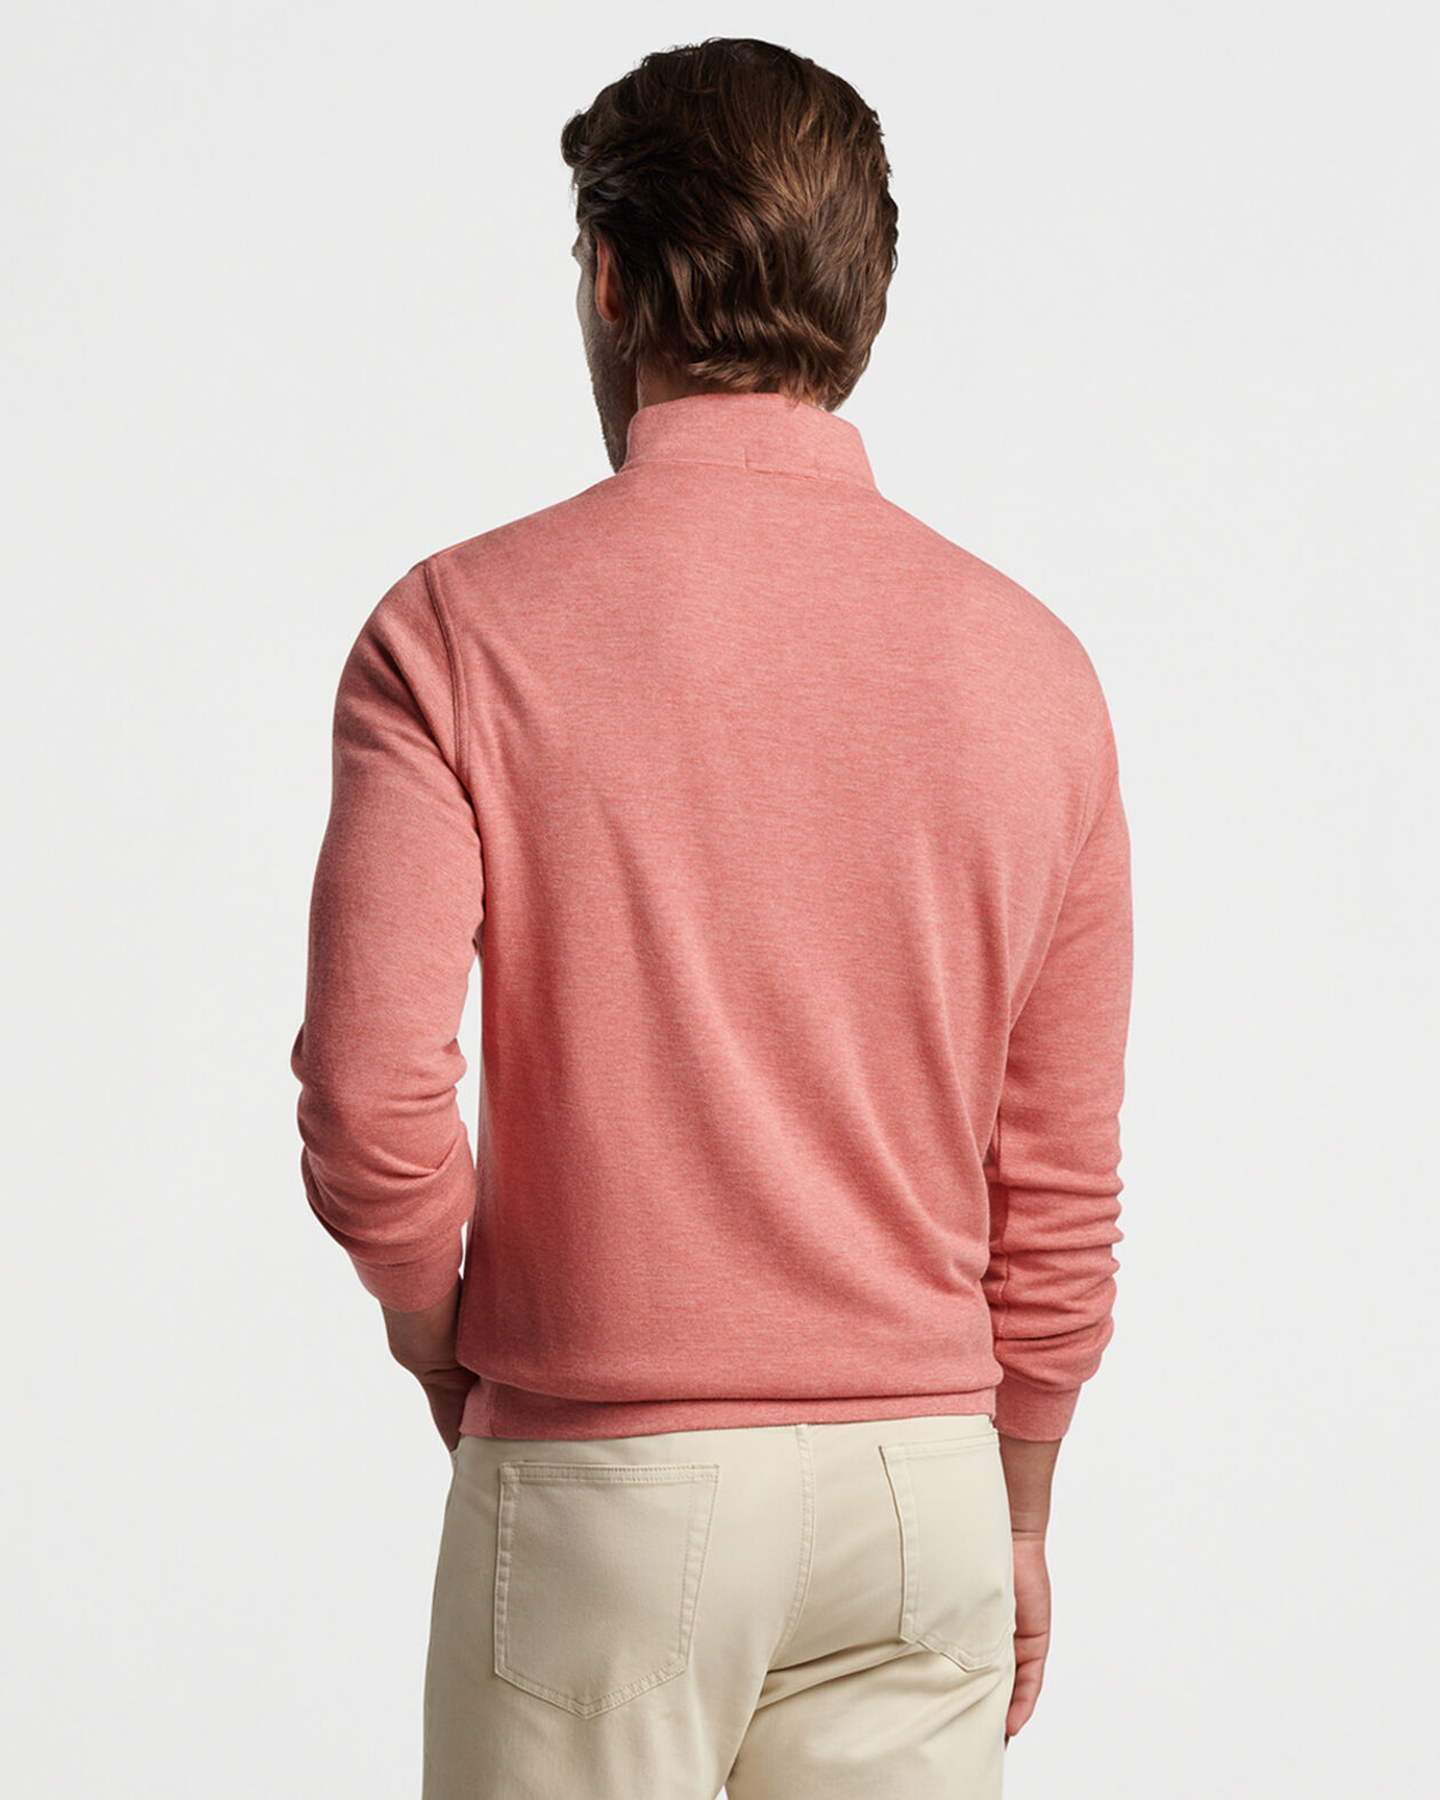 CROWN COMFORT PULLOVER - CLAY ROSE